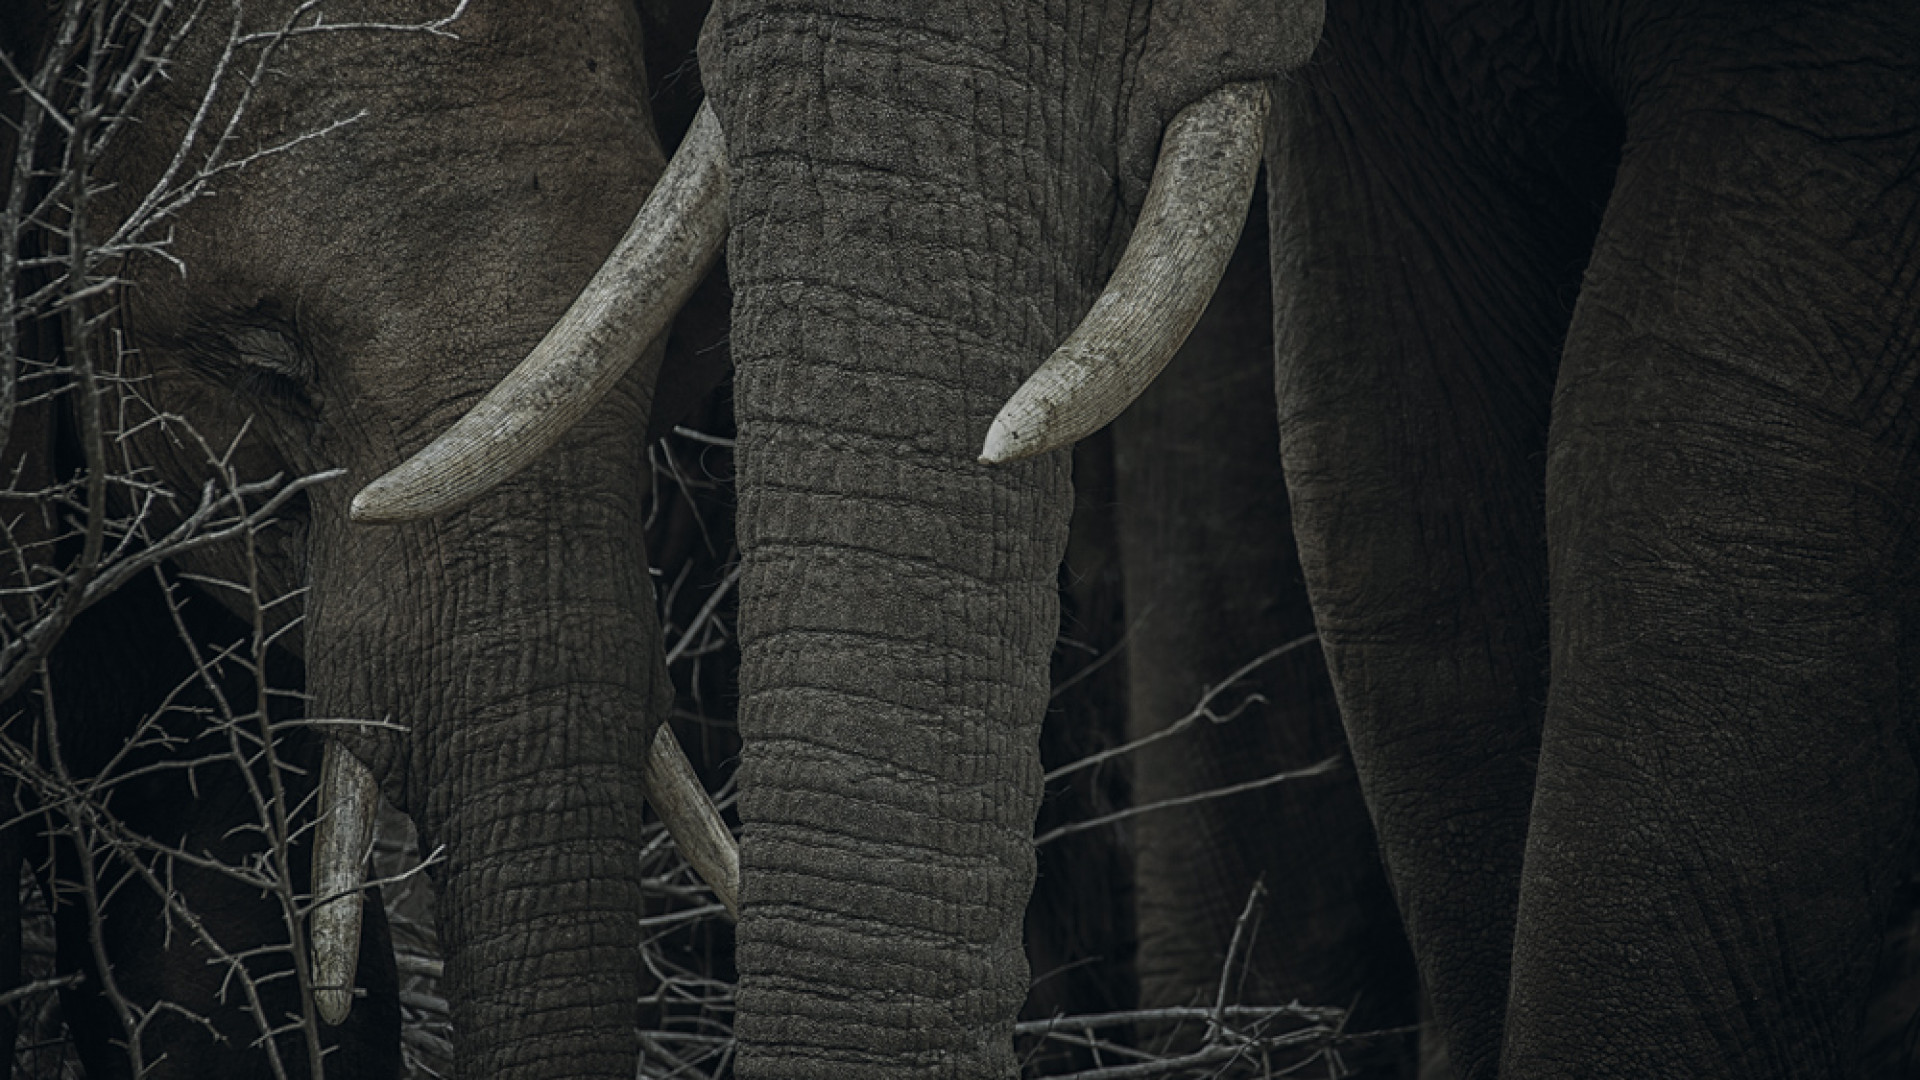 Trunks and tusks of elephants in Kruger National Park, South Africa